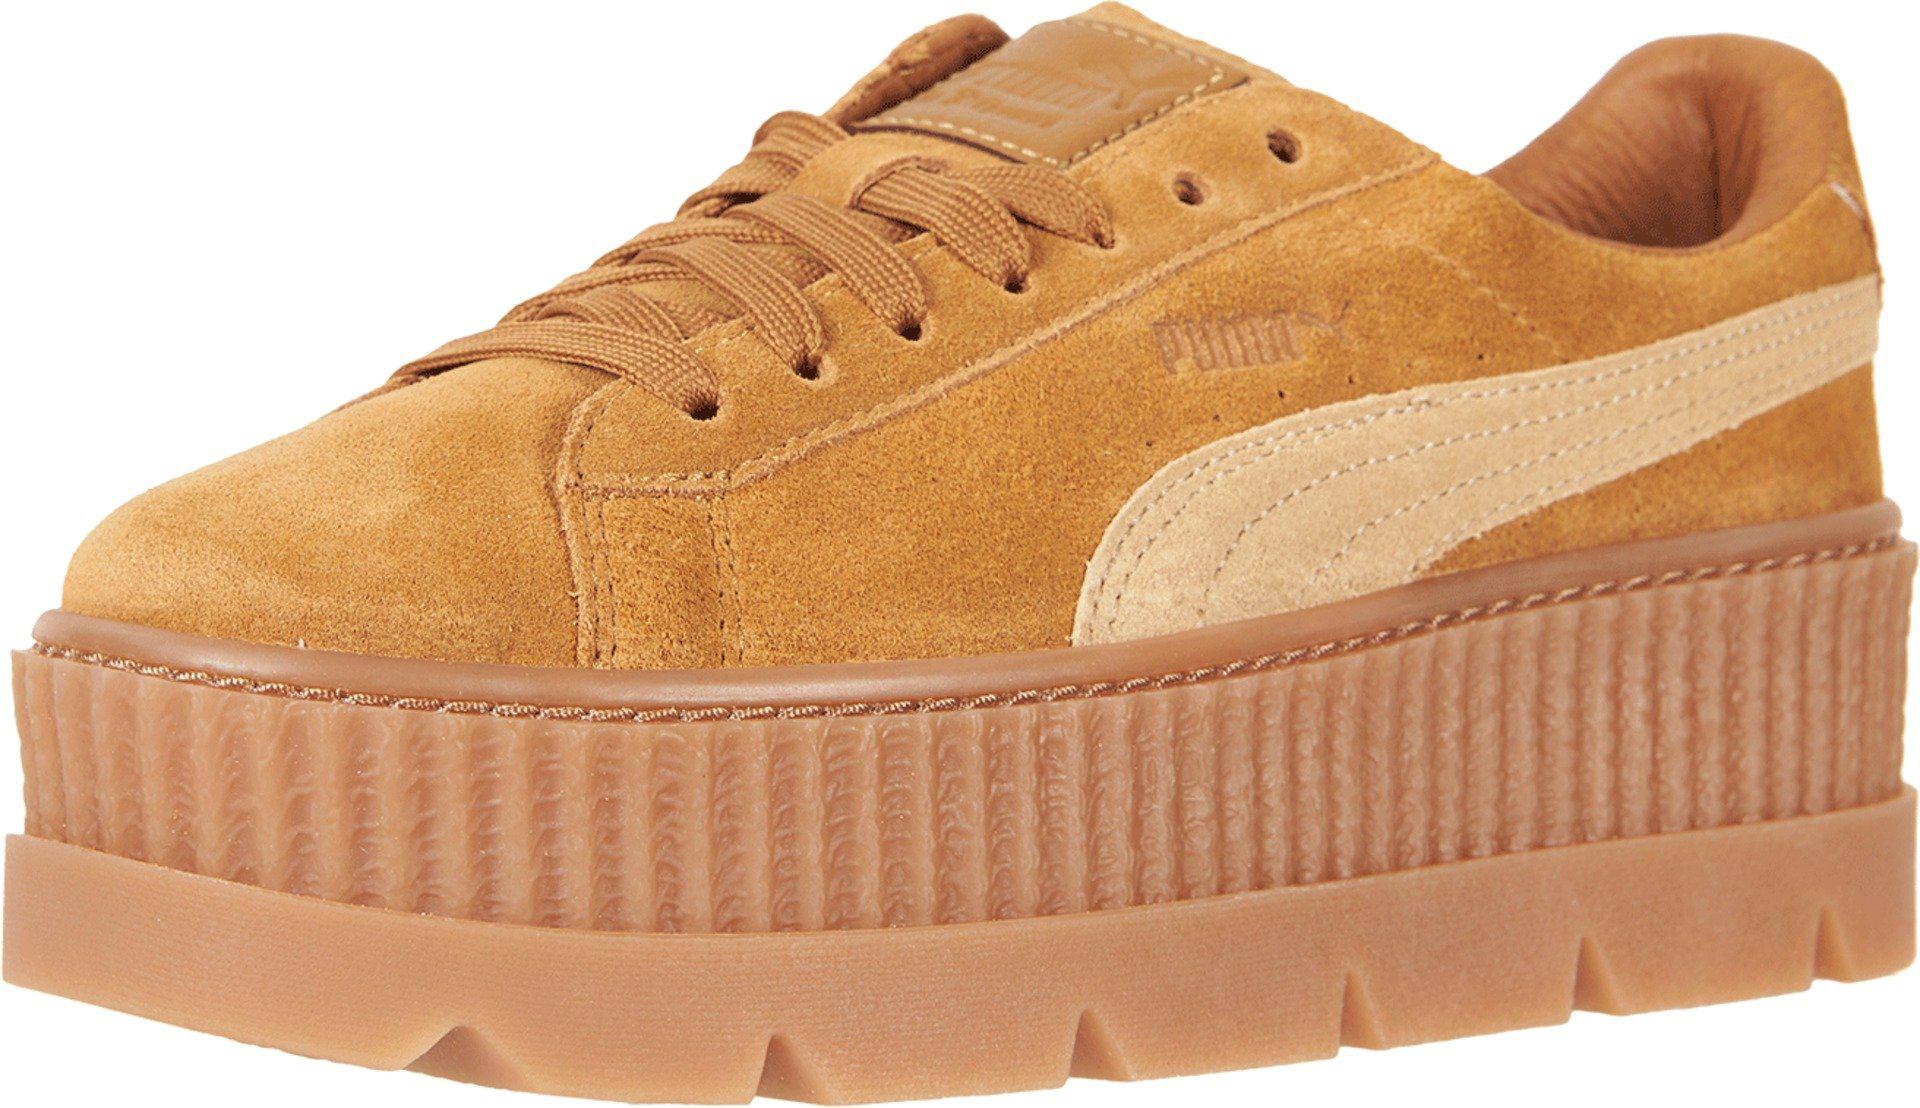 PUMA Cleated Creeper Suede in Golden Brown (Brown) - Lyst